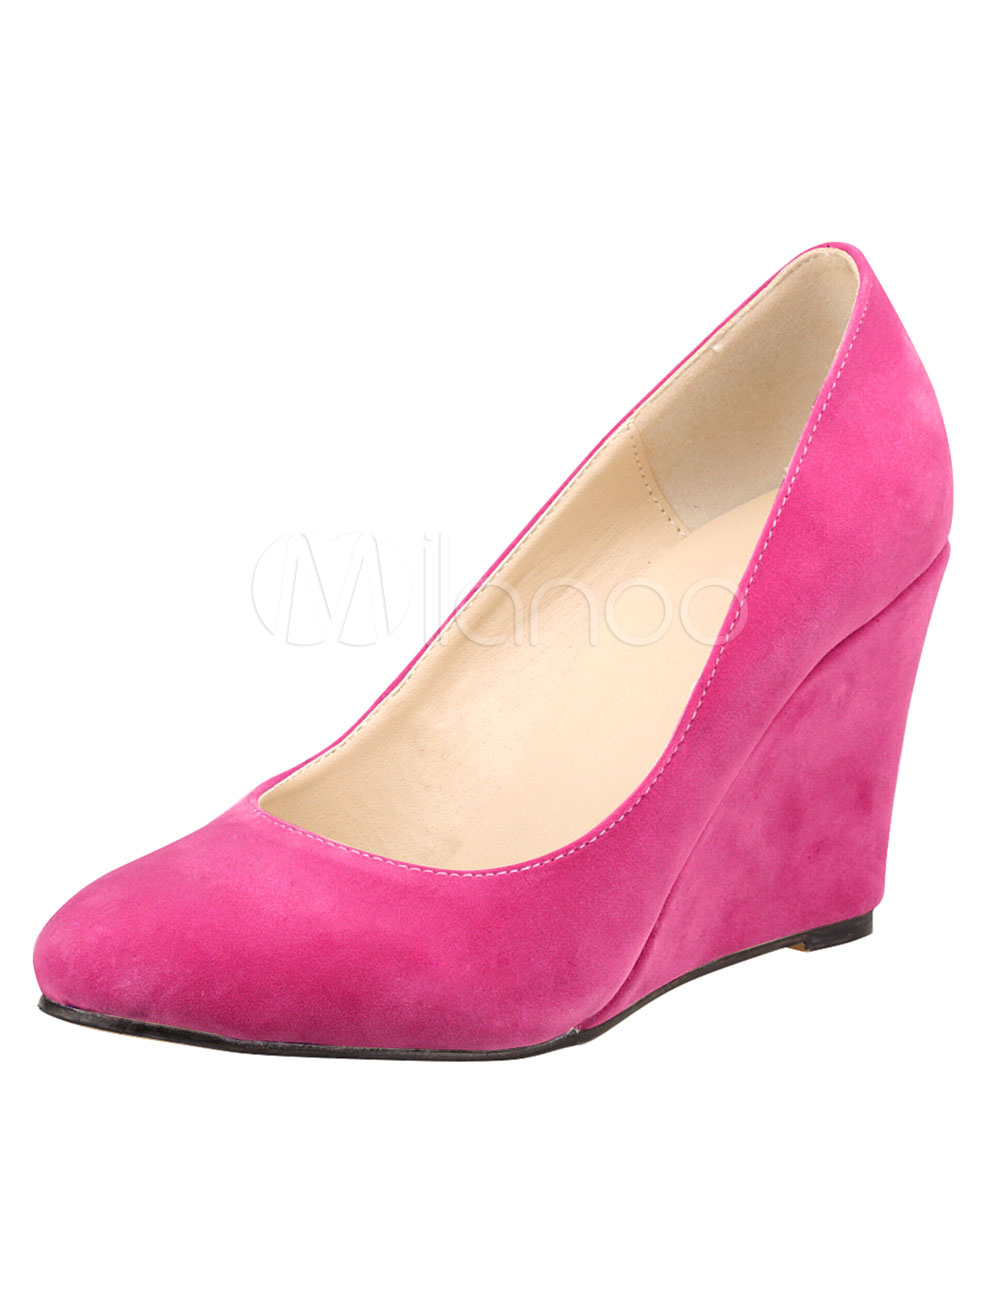 Suede Wedge Pumps Round Toe Slip On Shoes For Women - Milanoo.com